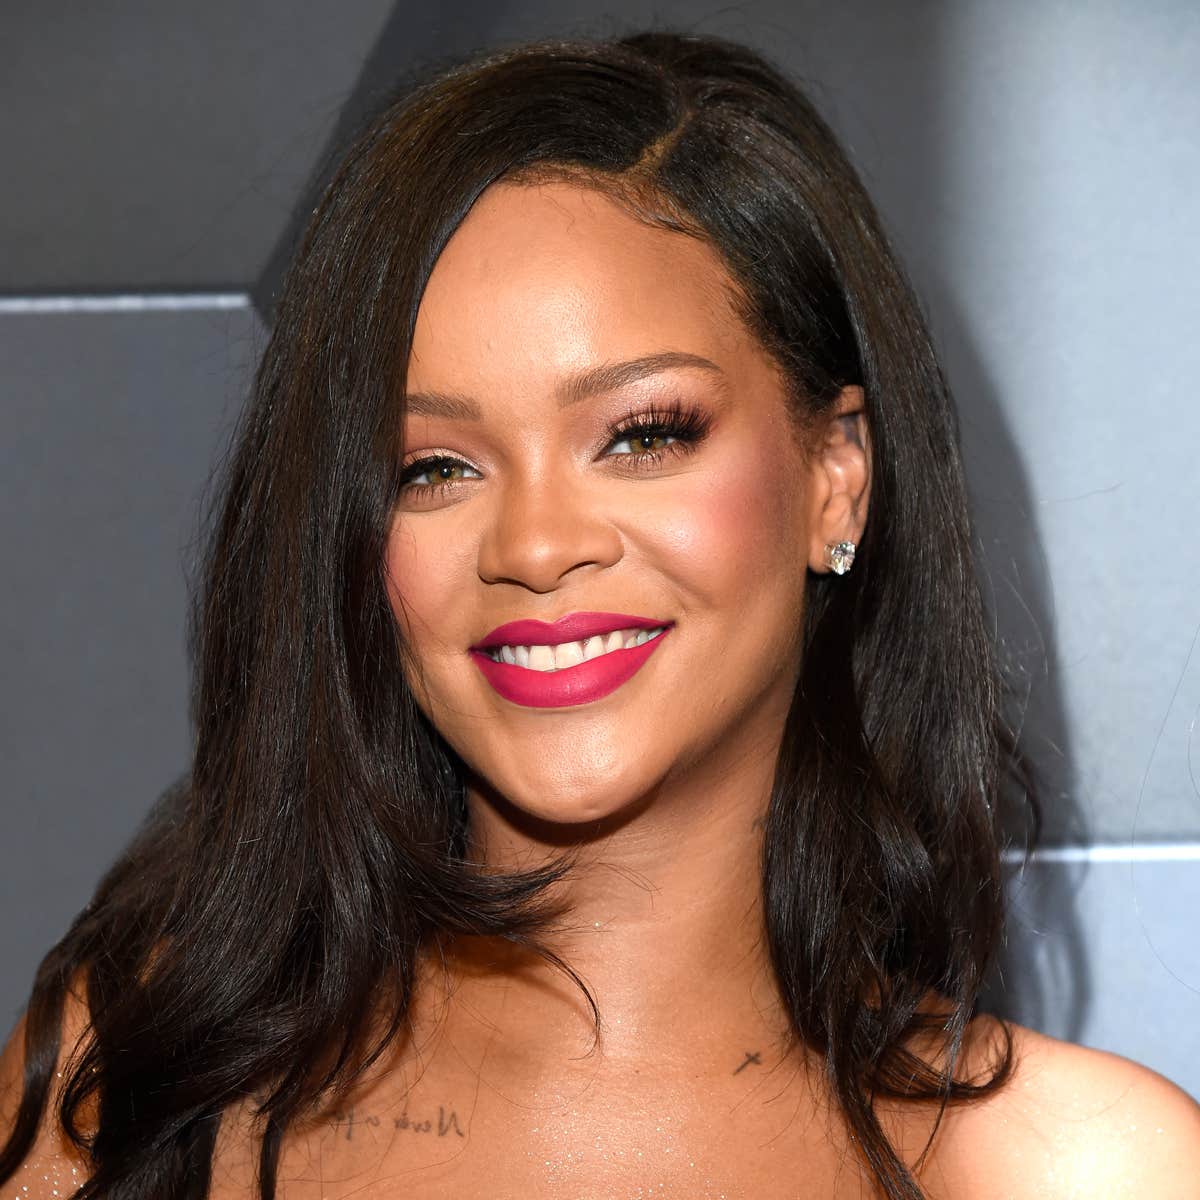 Rihanna Has New Bangs For Spring With Fresh Hairstyle